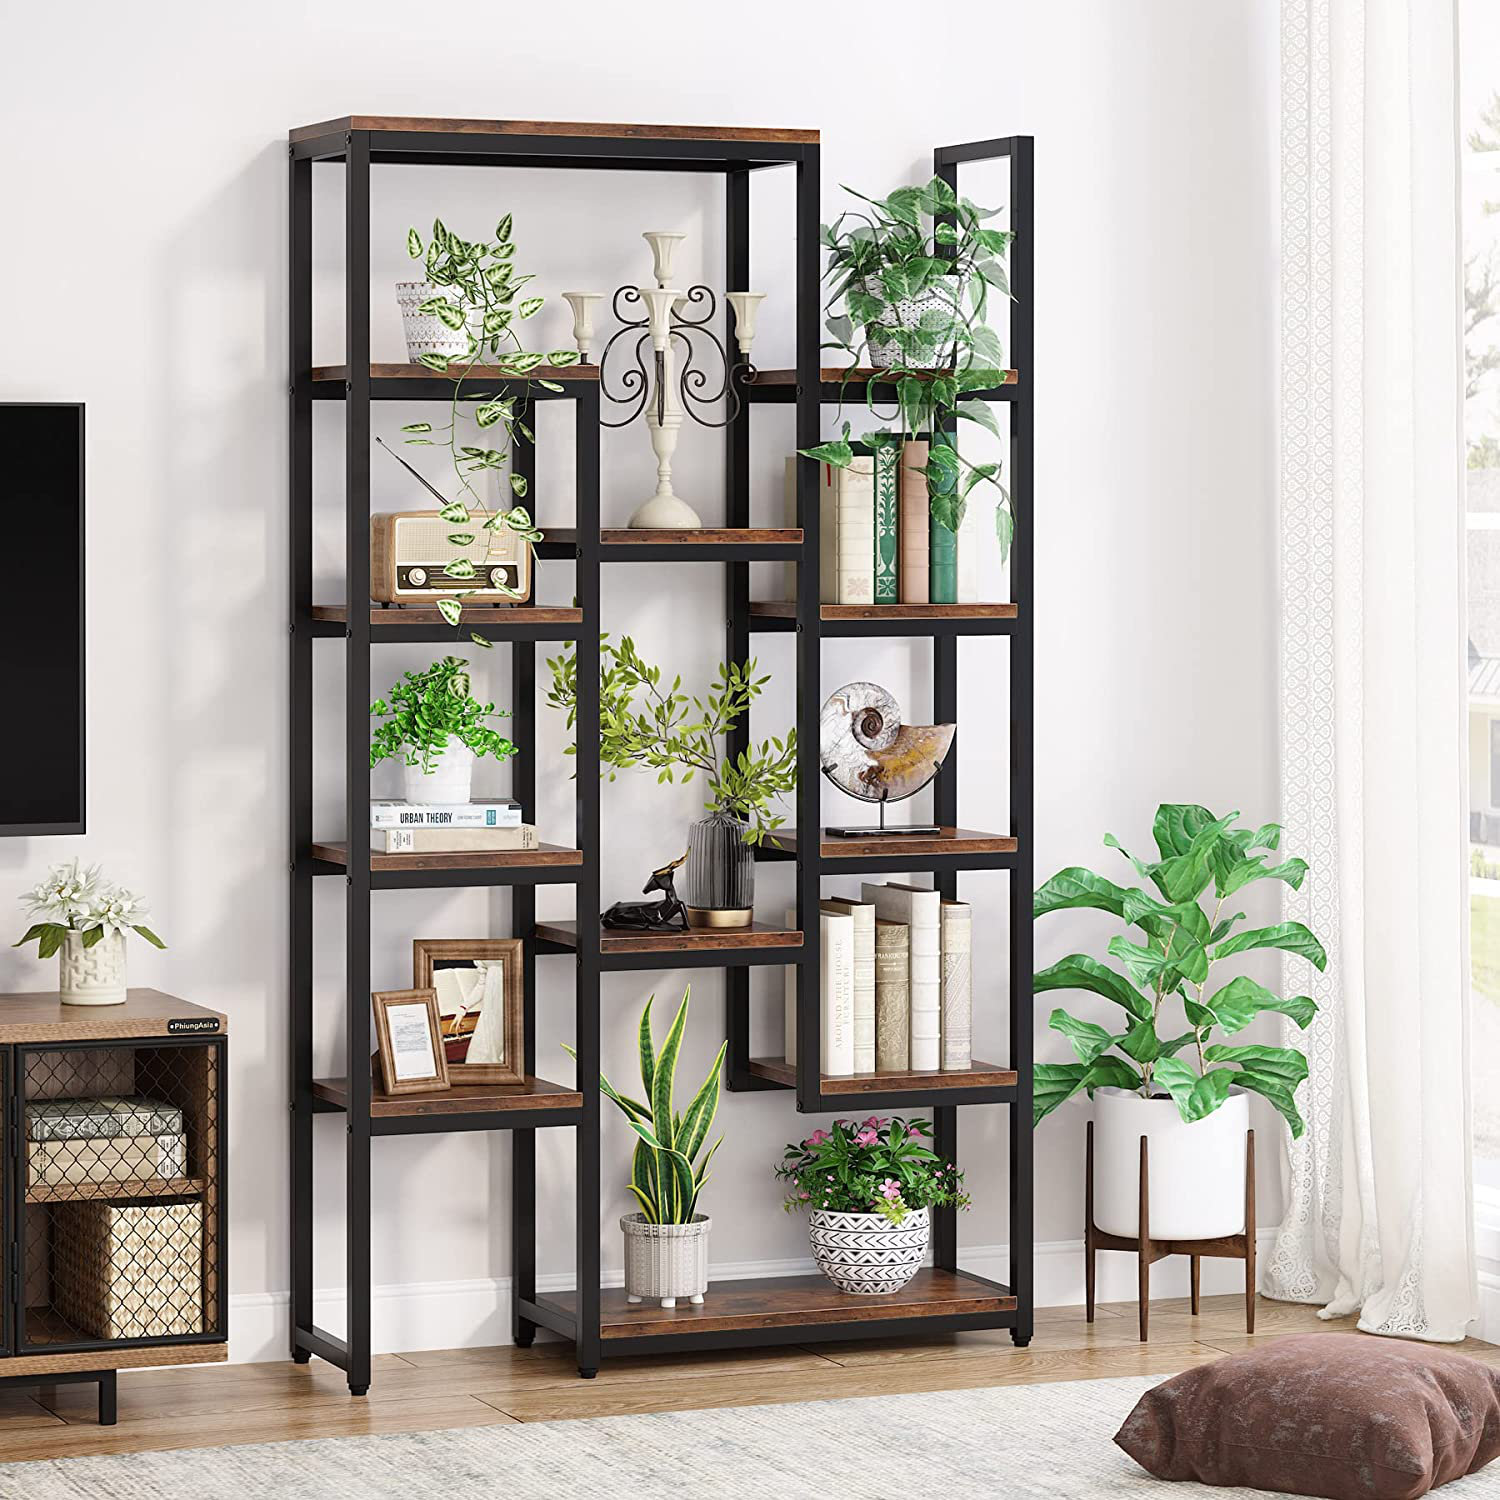 Wall bookshelves 23,62 inches long - Set of 4